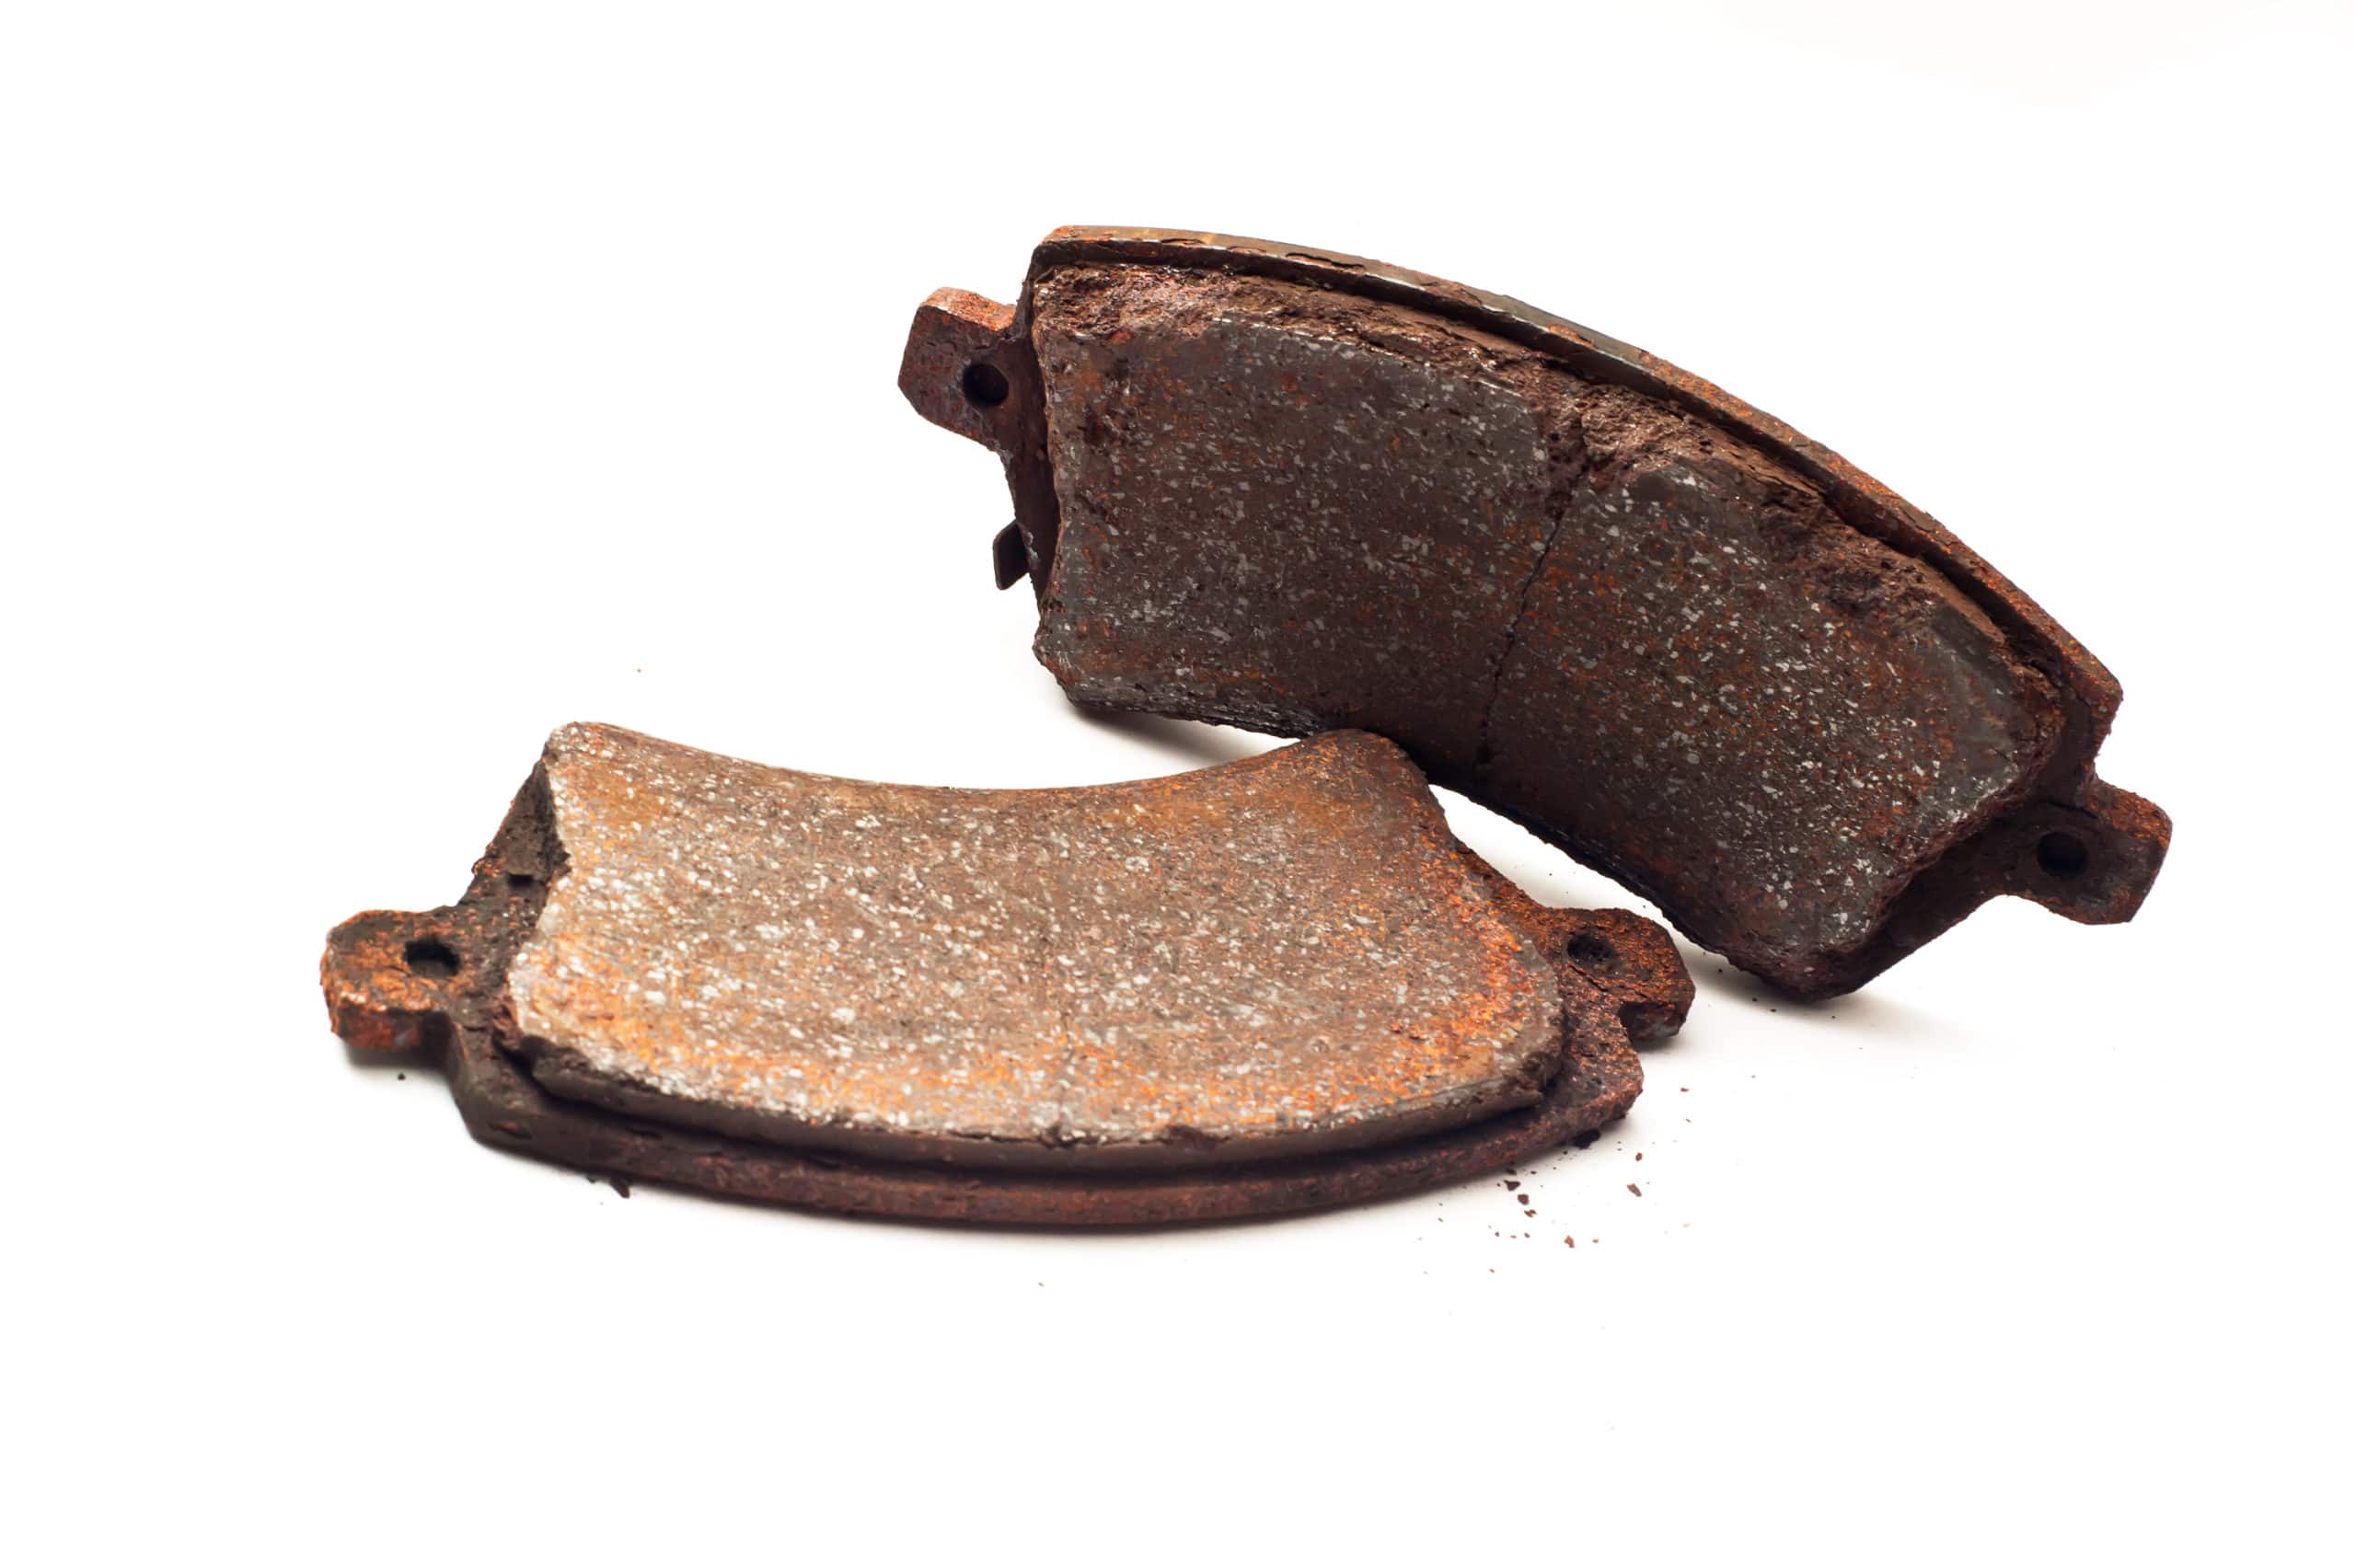 Brake wear impacts the environment, but there are technological trends to mitigate the problem